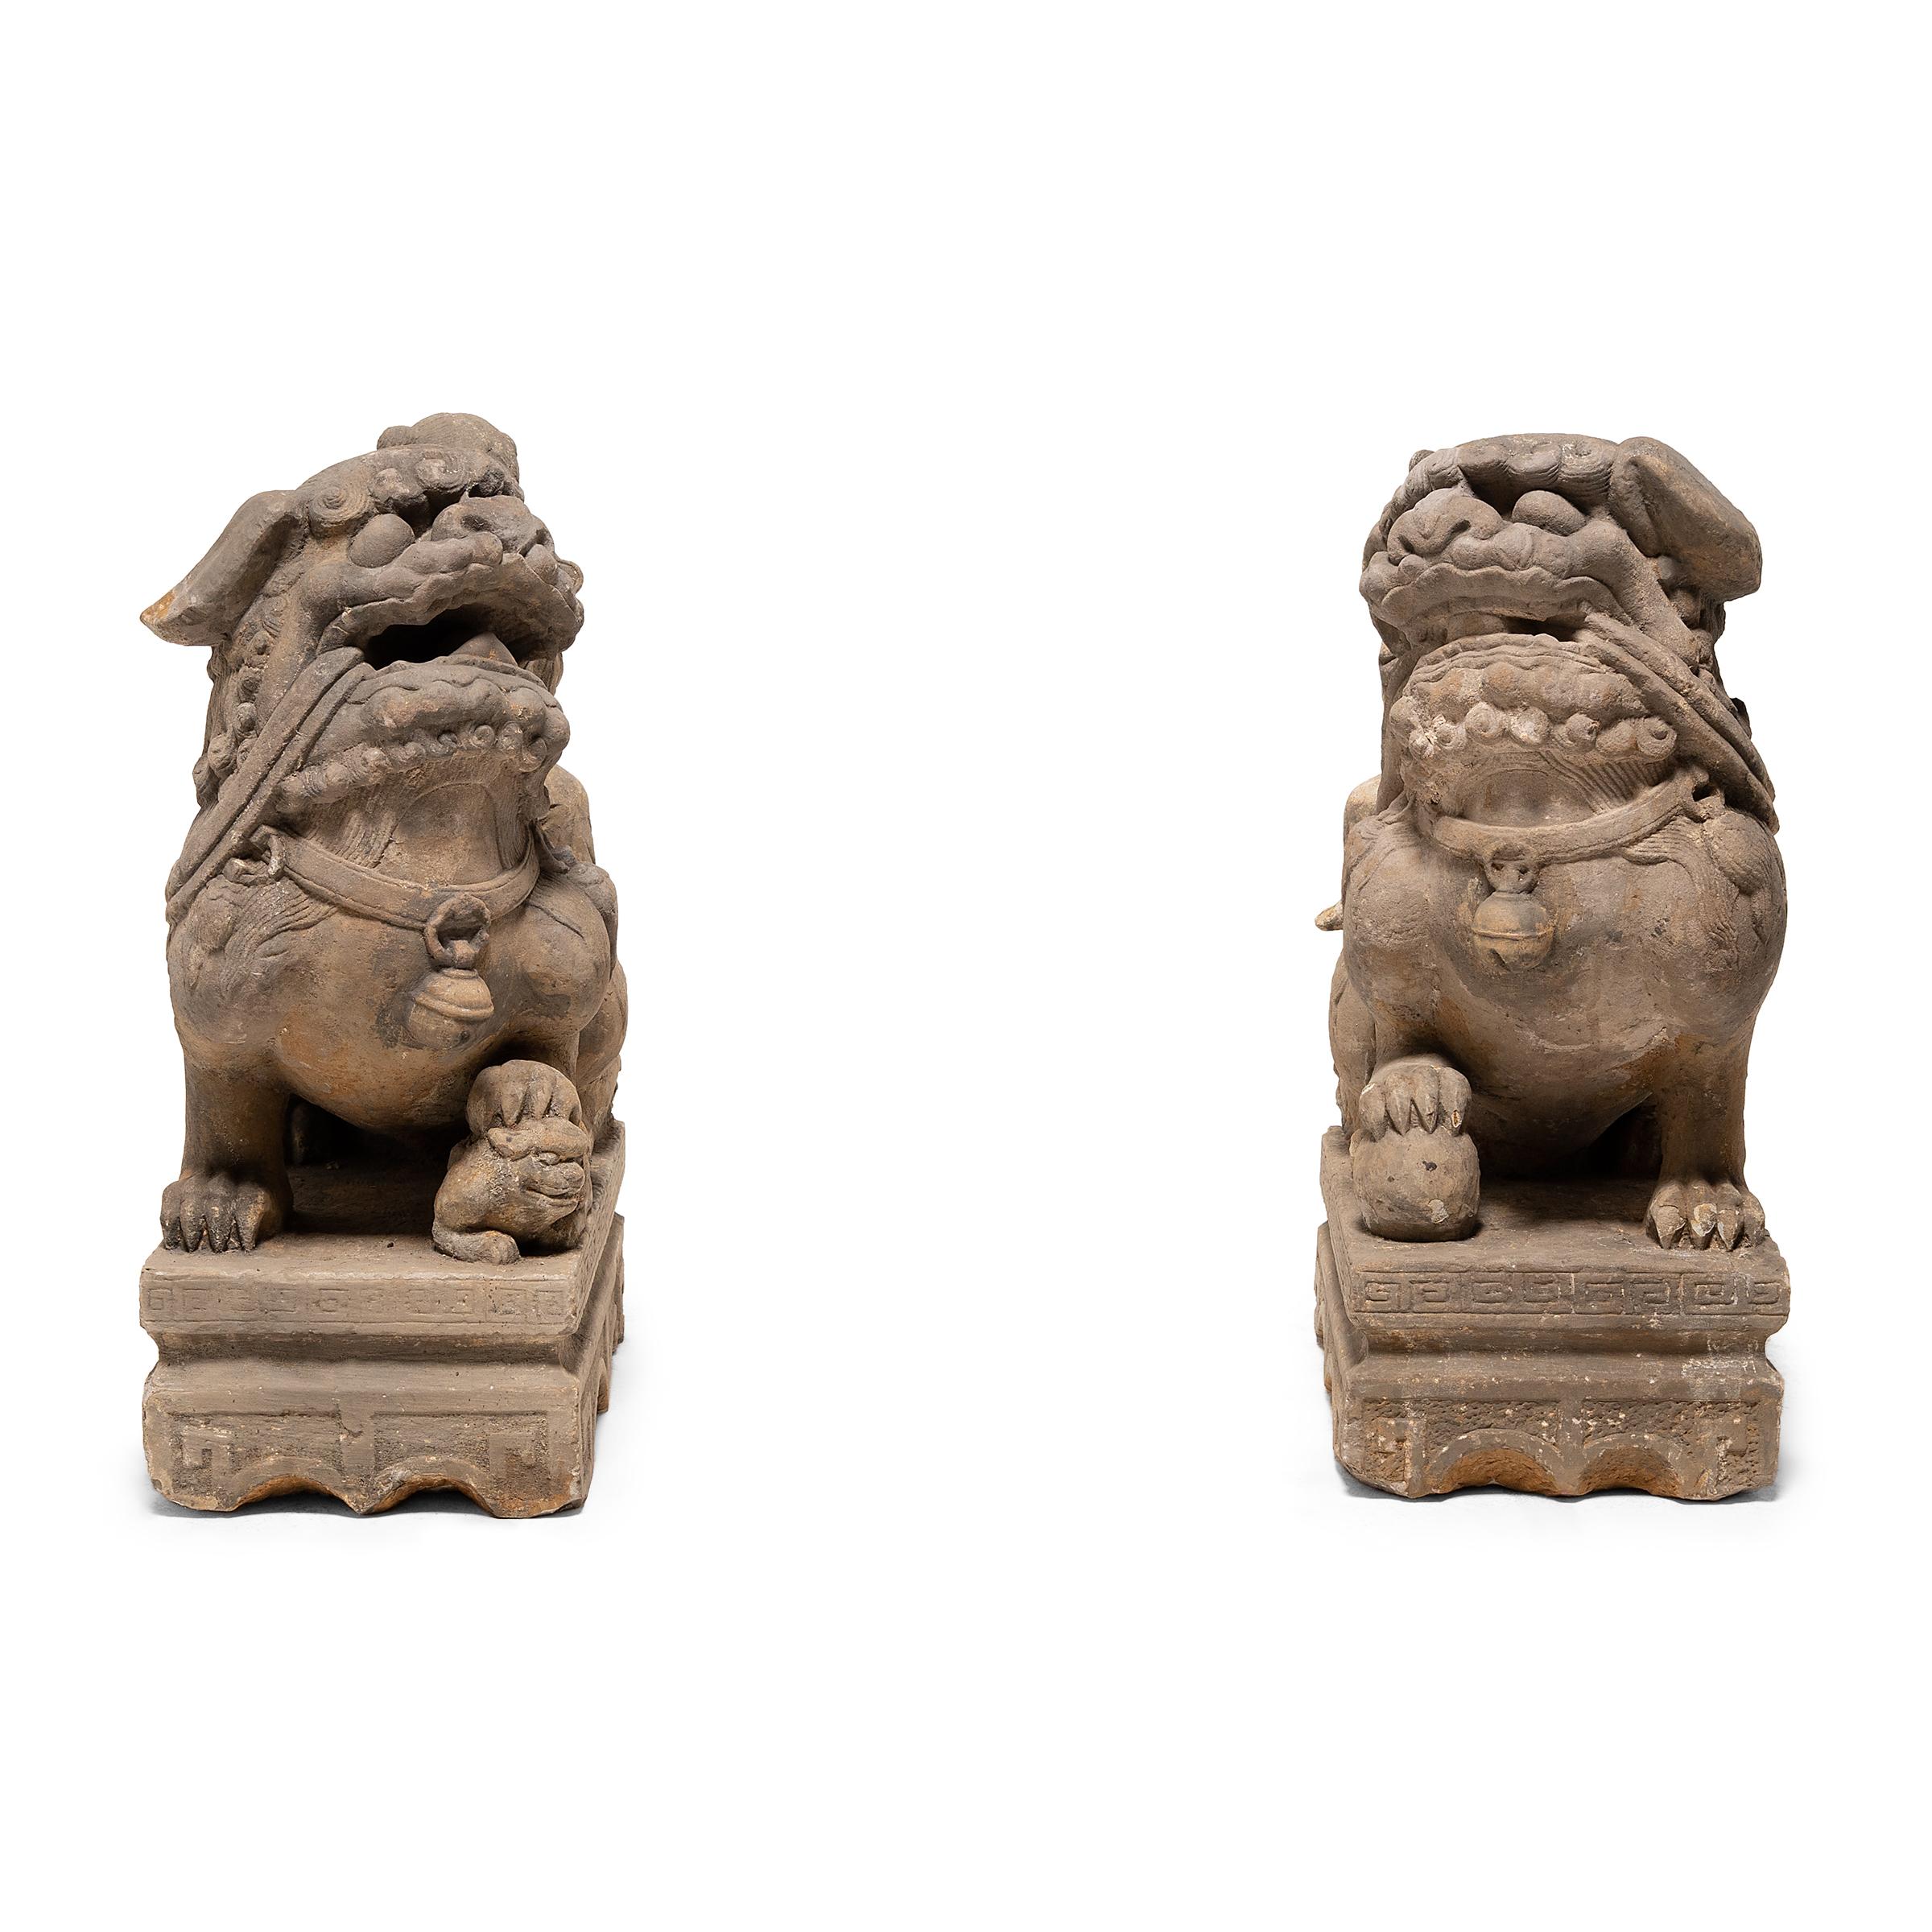 This pair of intricately carved limestone fu lions once protected the entry of a grand courtyard home in 19th-century China. Also known as shizi or foo dogs, the mythical creatures are believed to be benevolent protectors and are traditionally